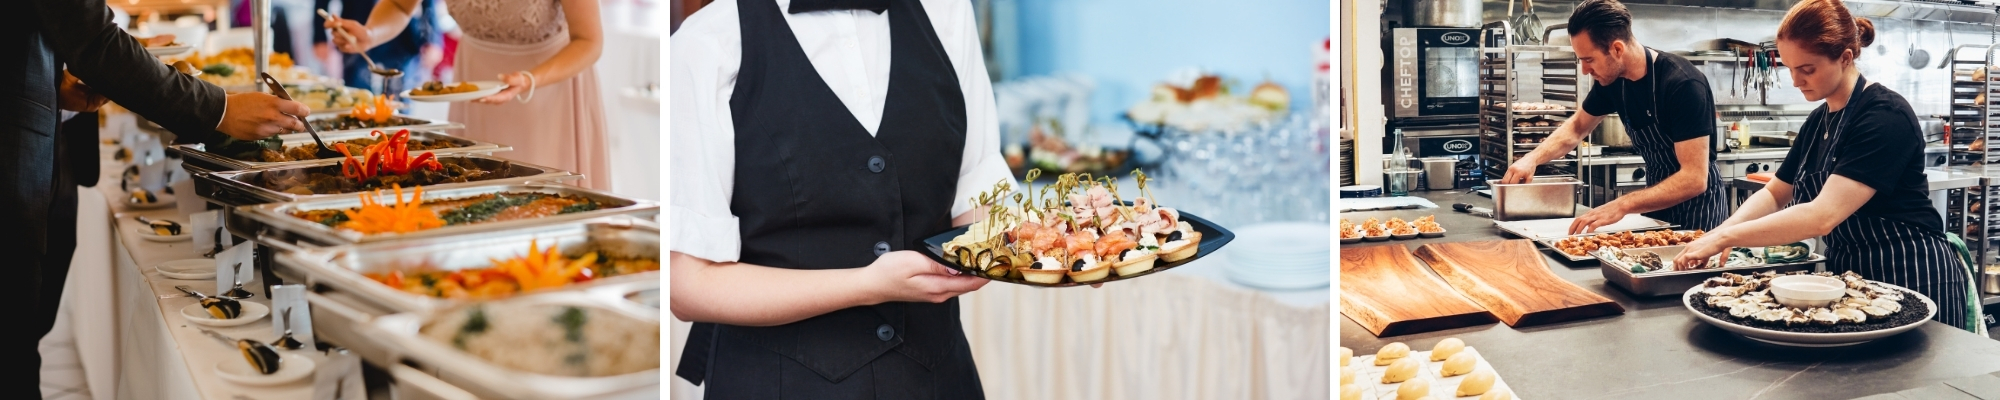 Catering Business Financing